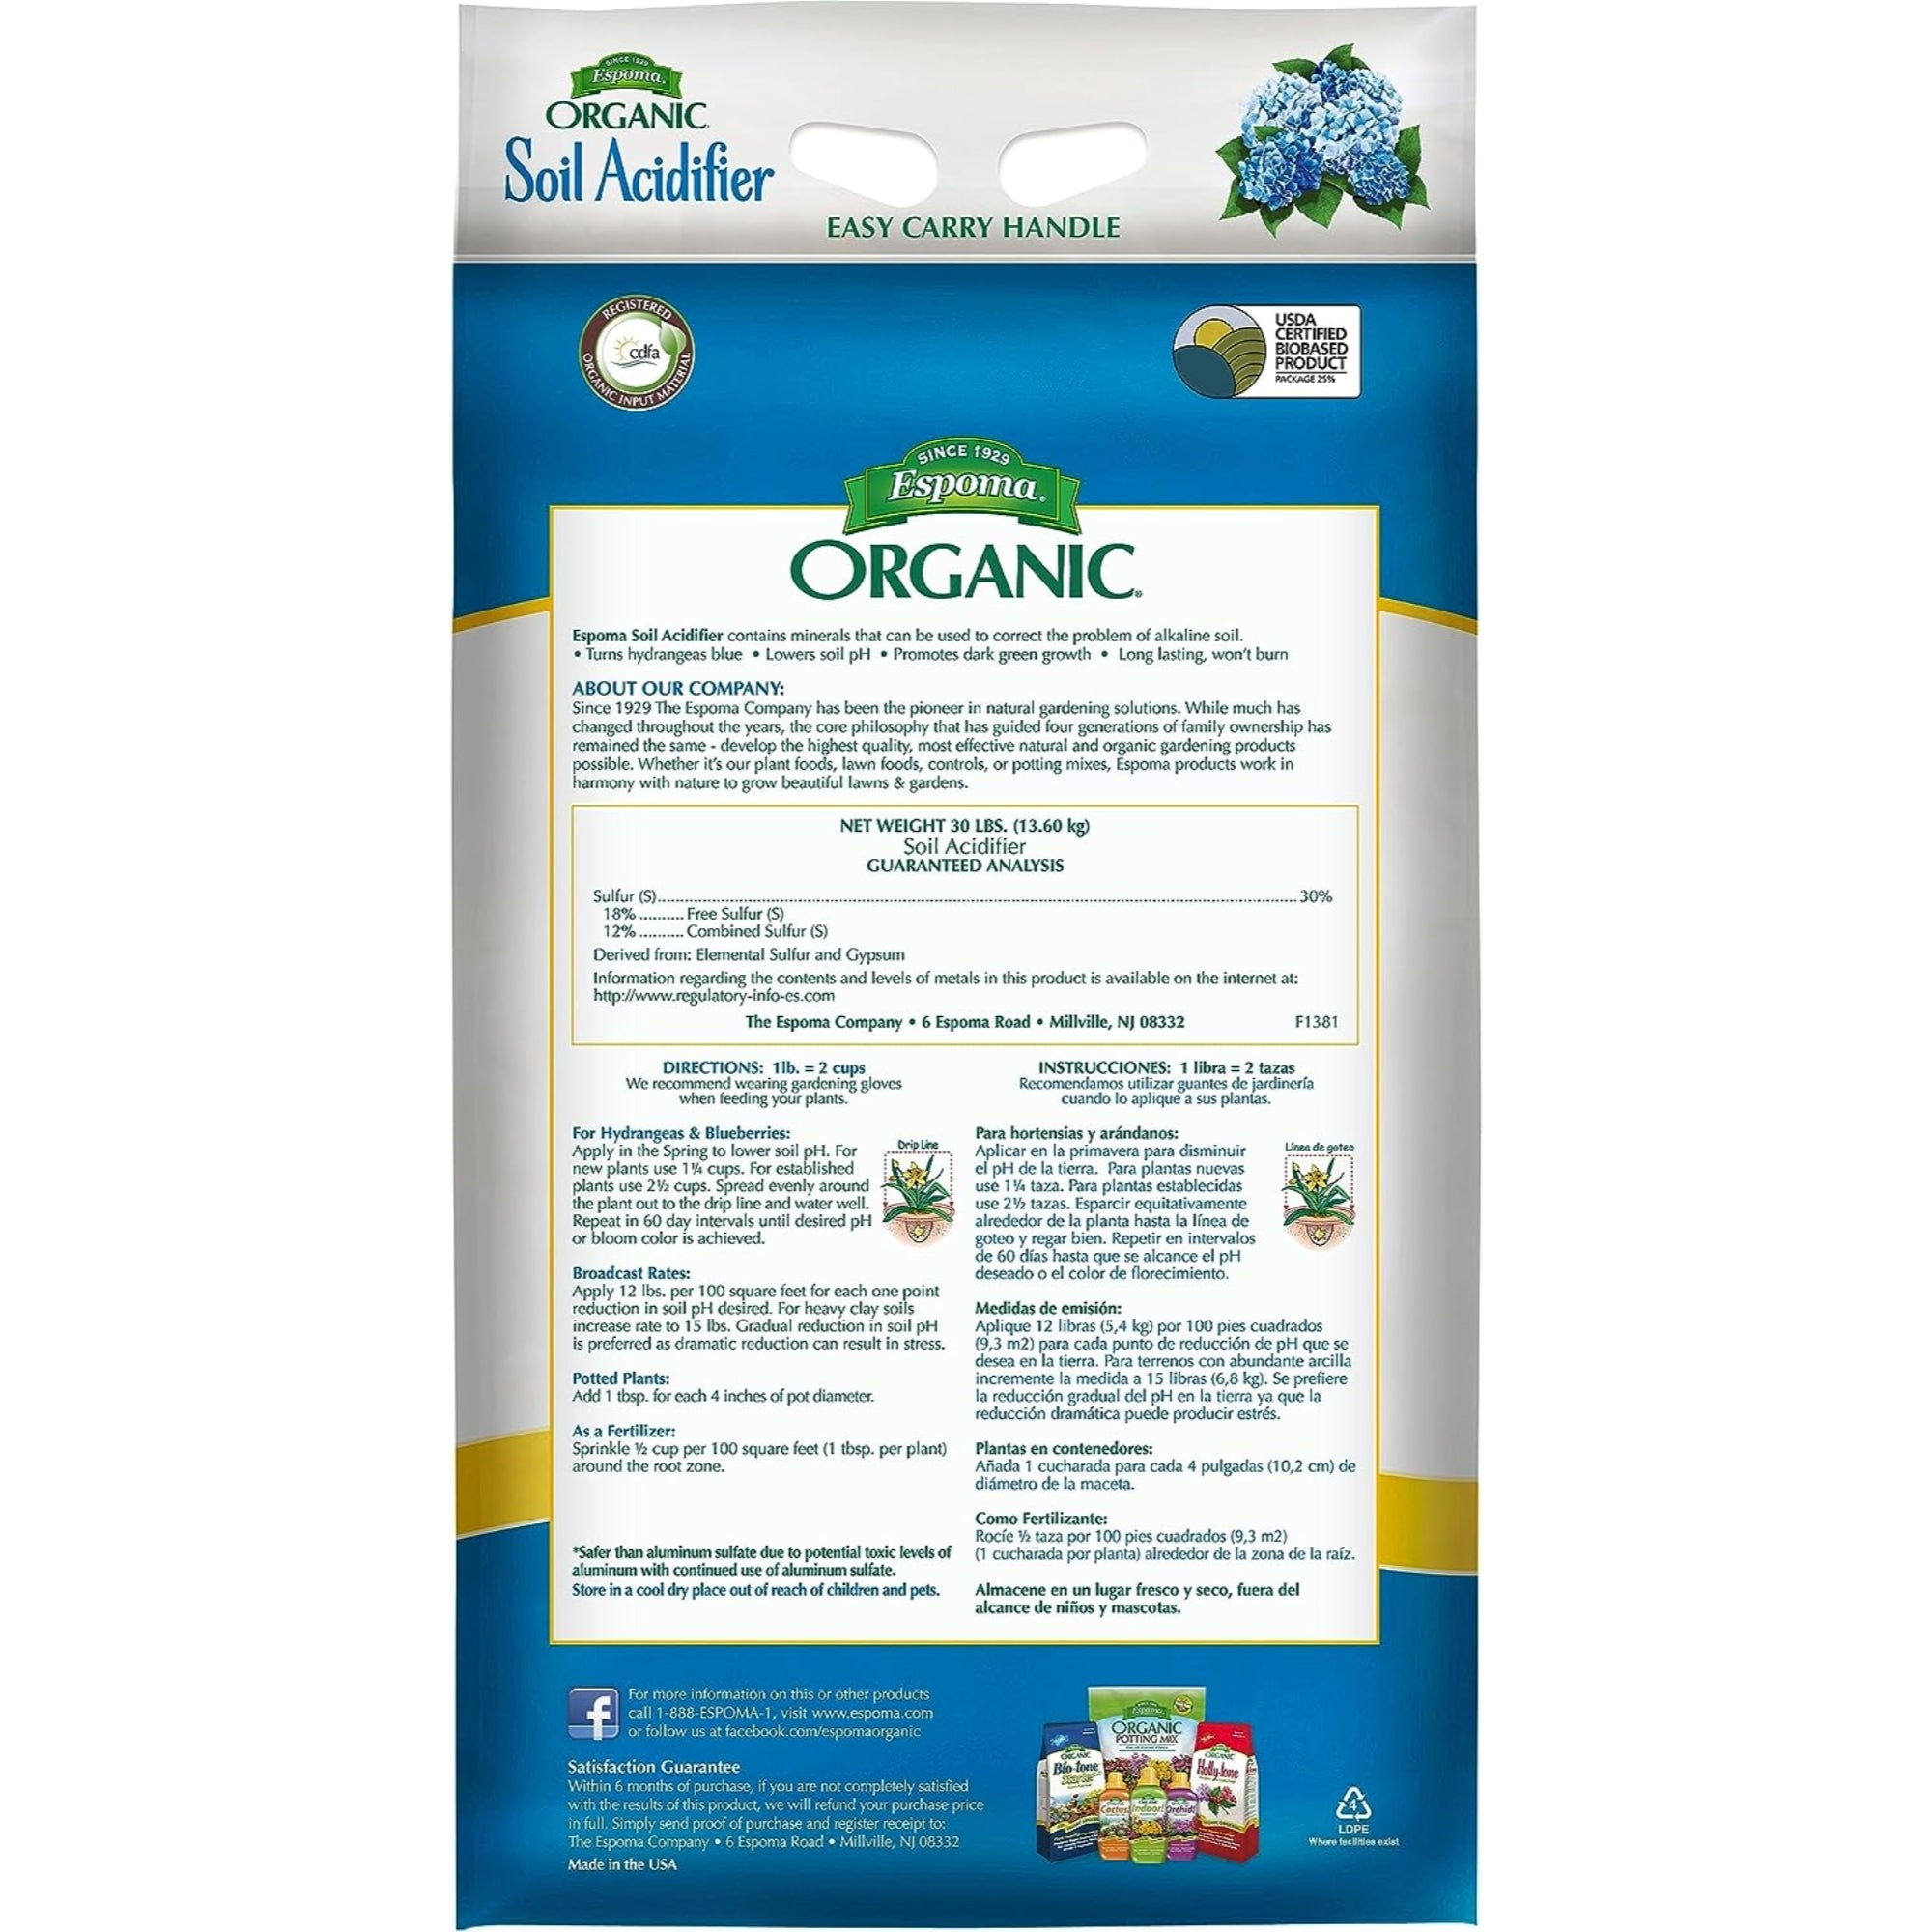 Espoma Organic Soil Acidifier Soil Amendment, Lowers Soil pH and Turns Hydrangeas Blue! Contains Elemental Sulfur, Can be Used for Organic Gardening